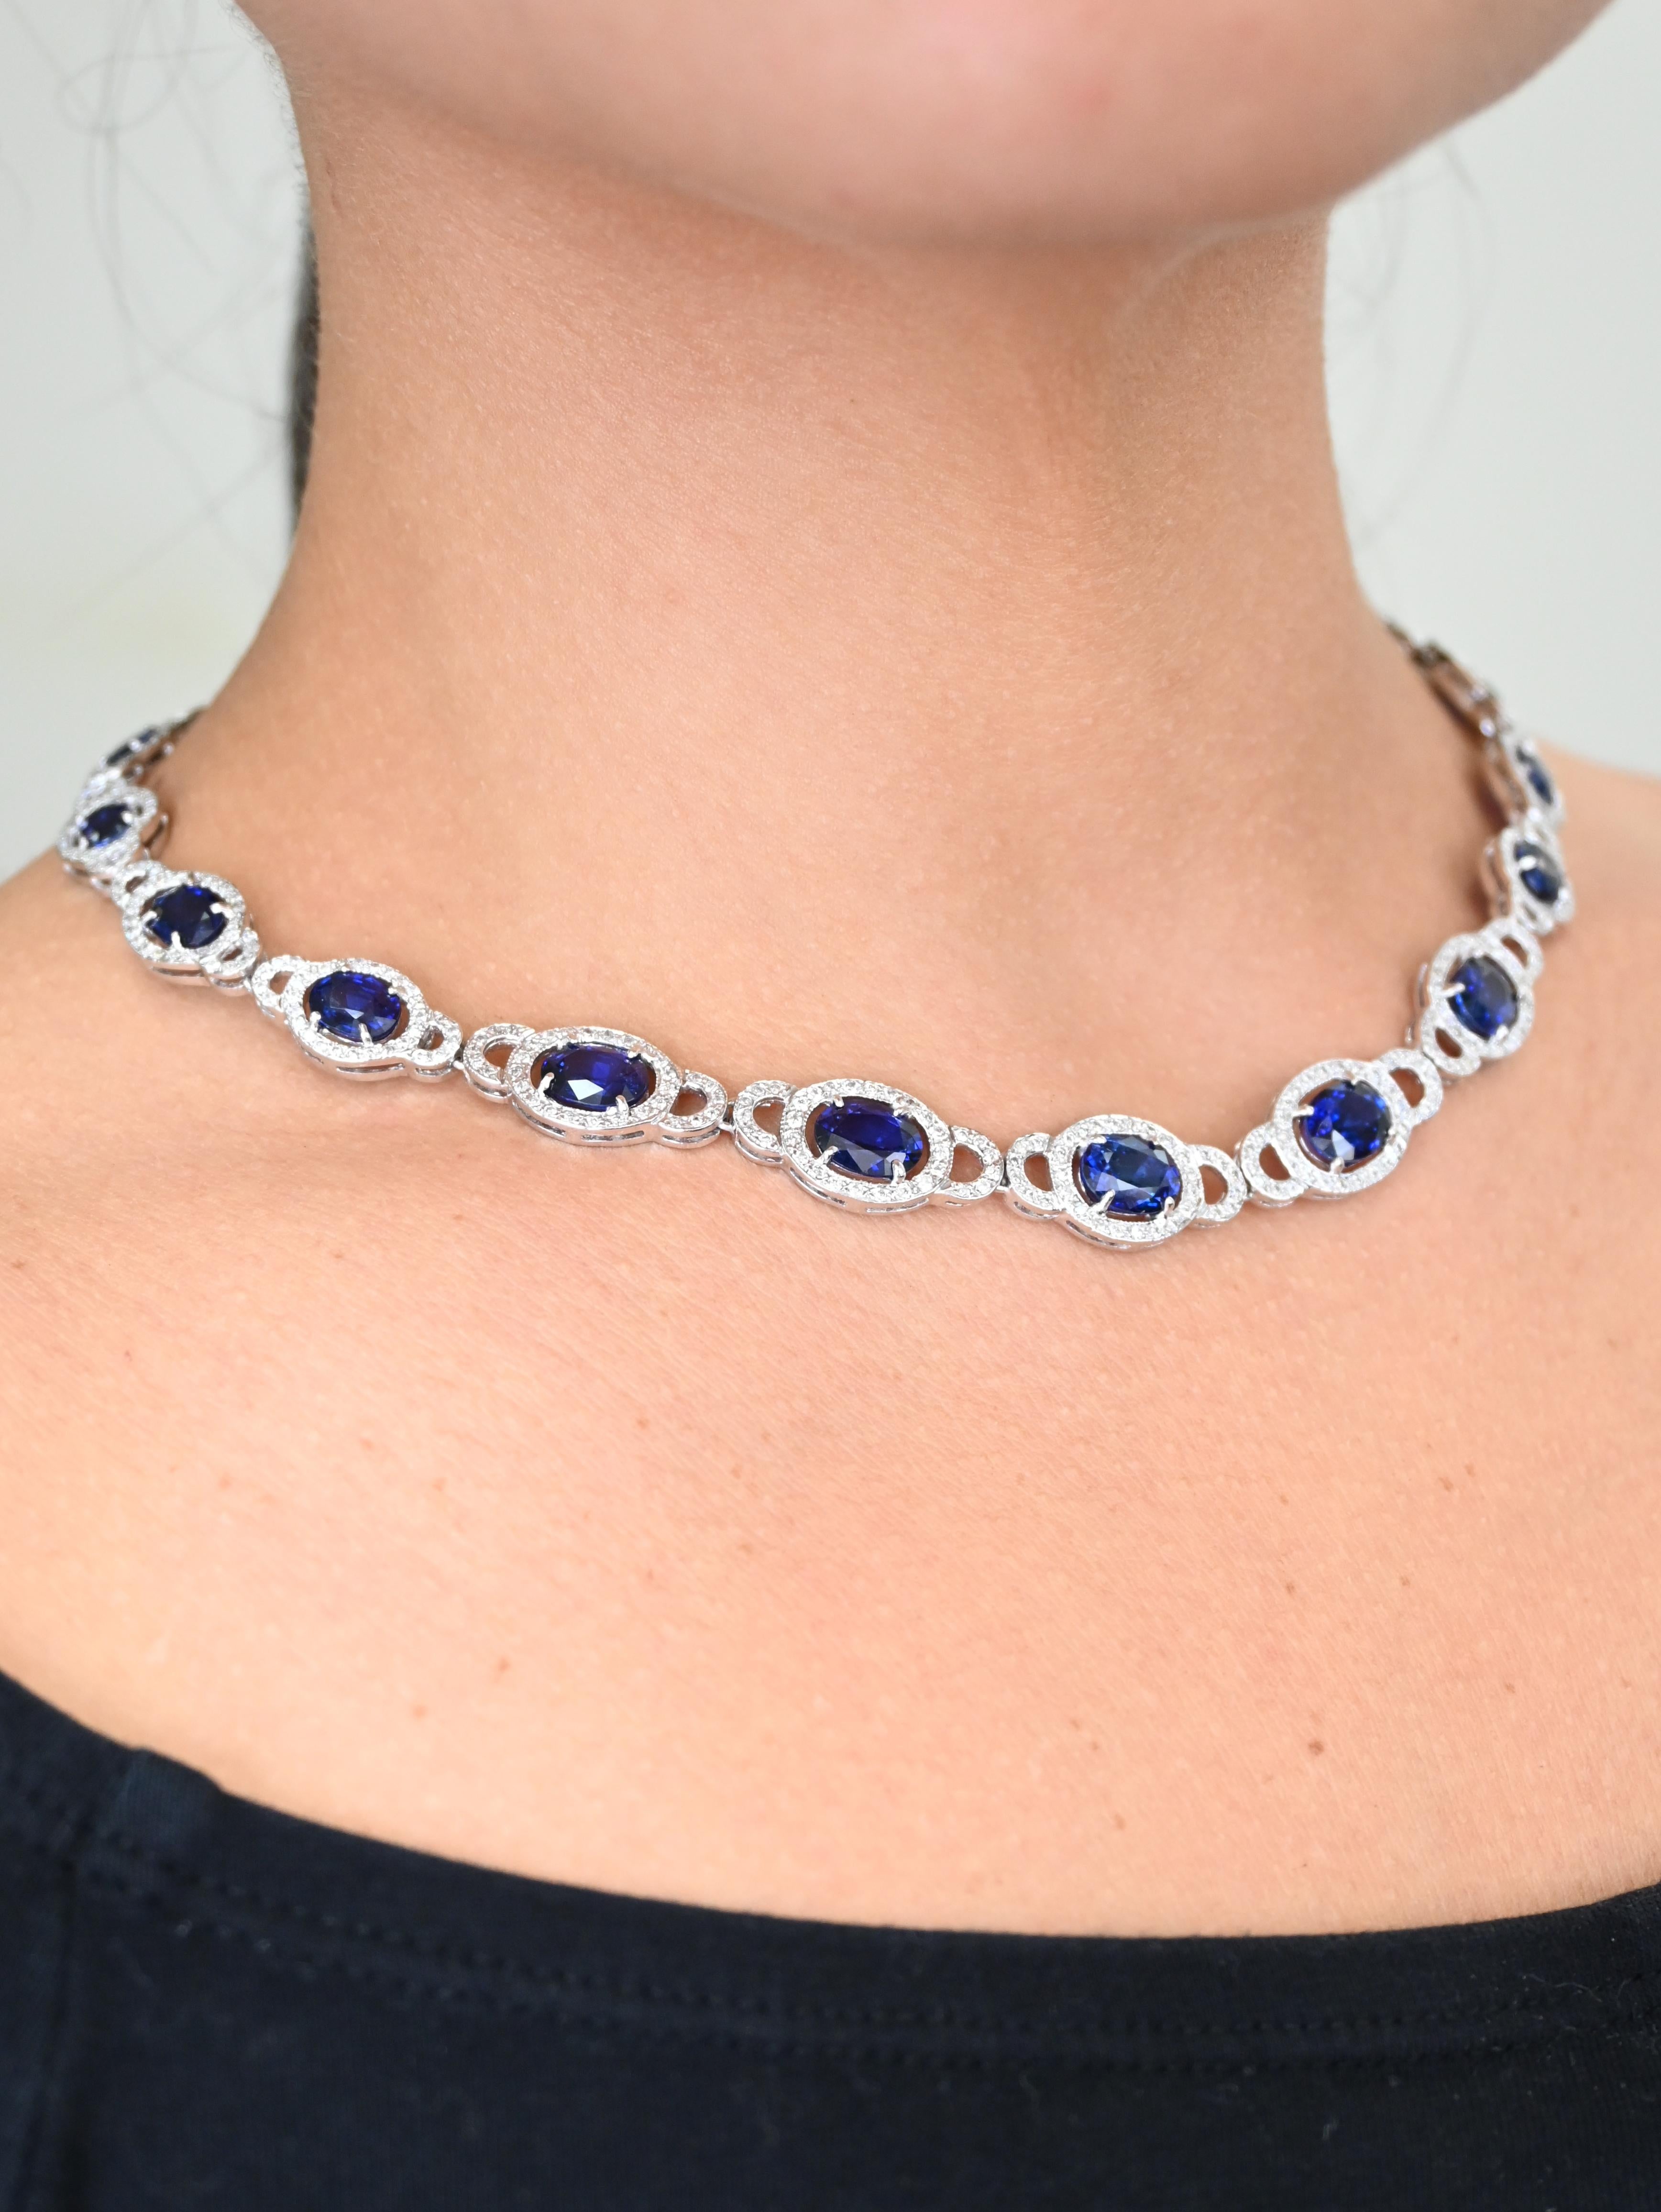 Beautiful necklace features 7.01 carats of white diamonds and 31.02 carats of sapphires. 